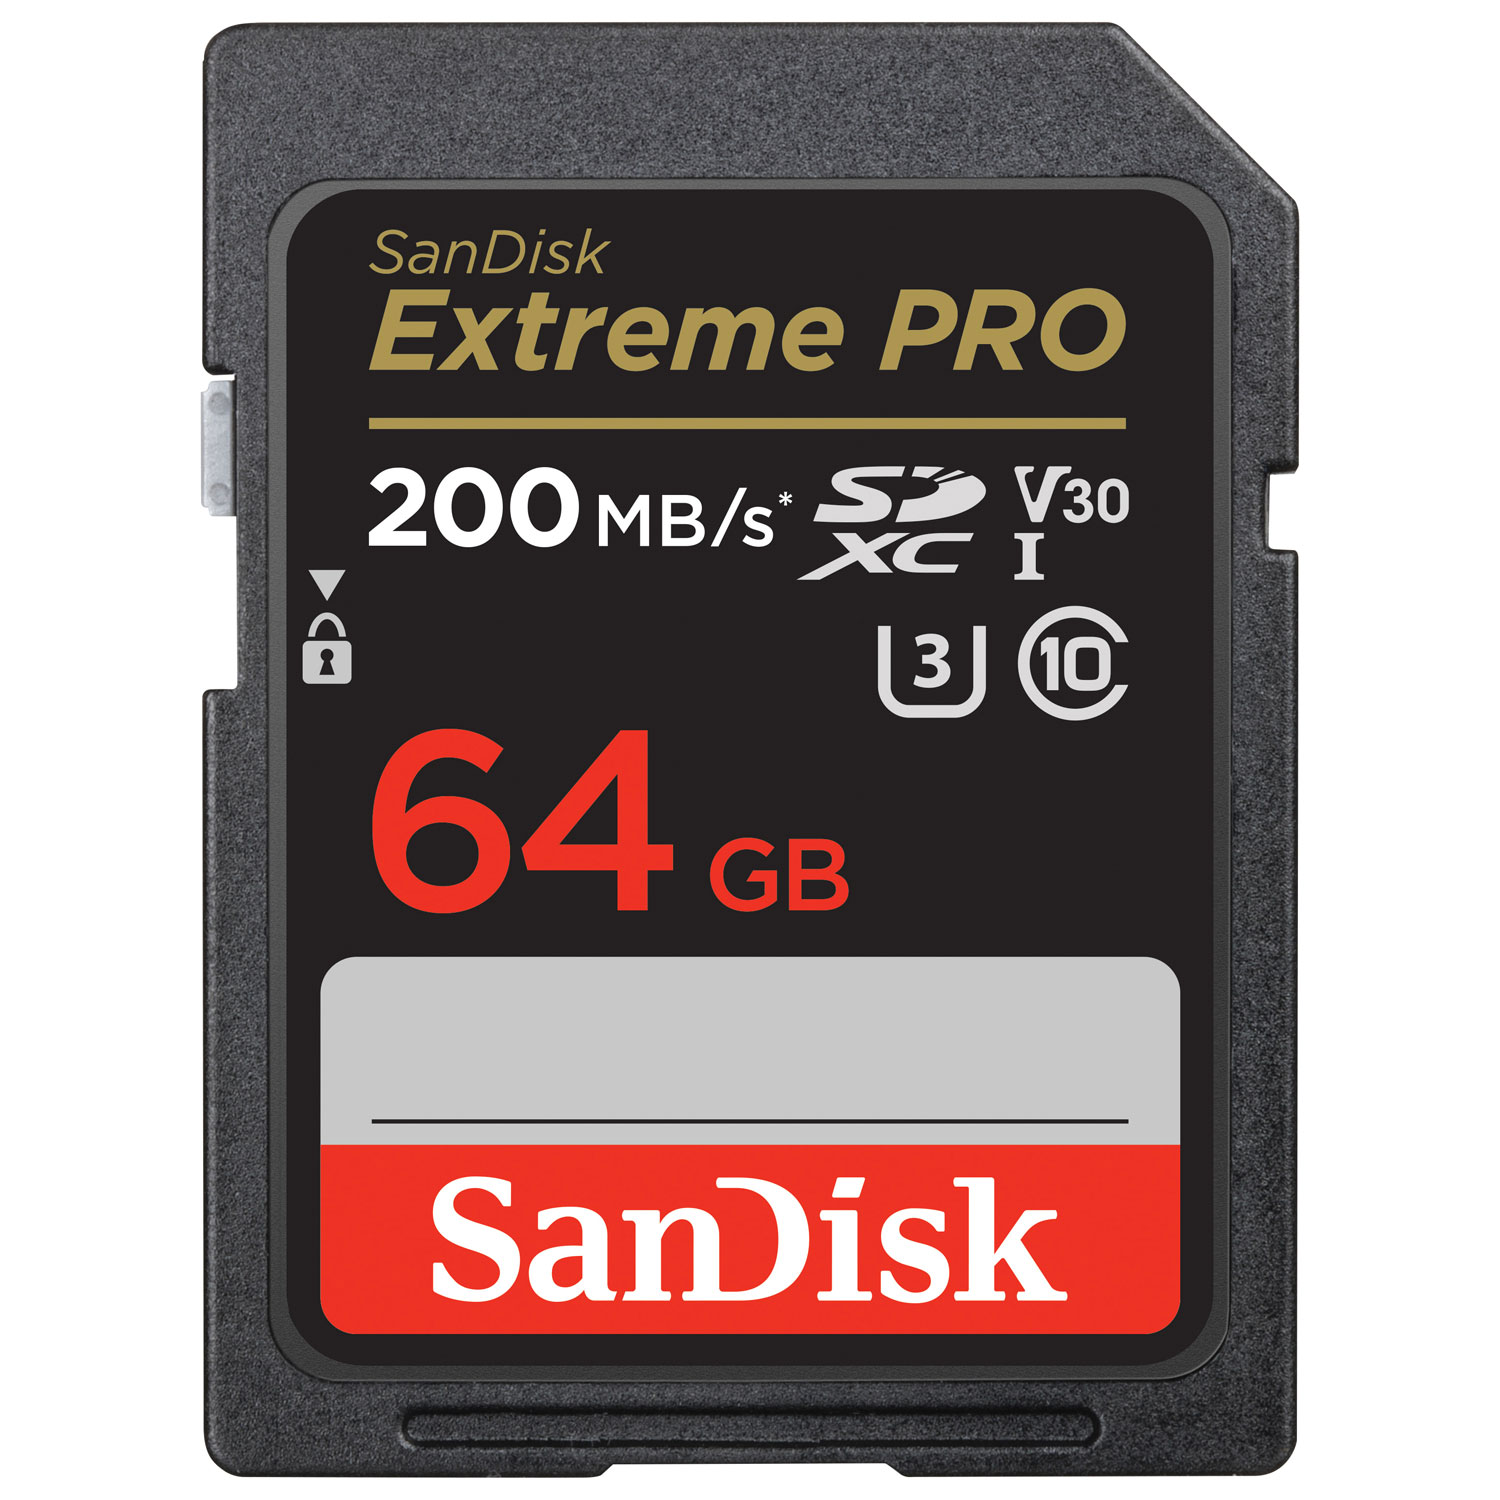 SanDisk Extreme Pro 64GB 200MB/s SDXC Memory Card